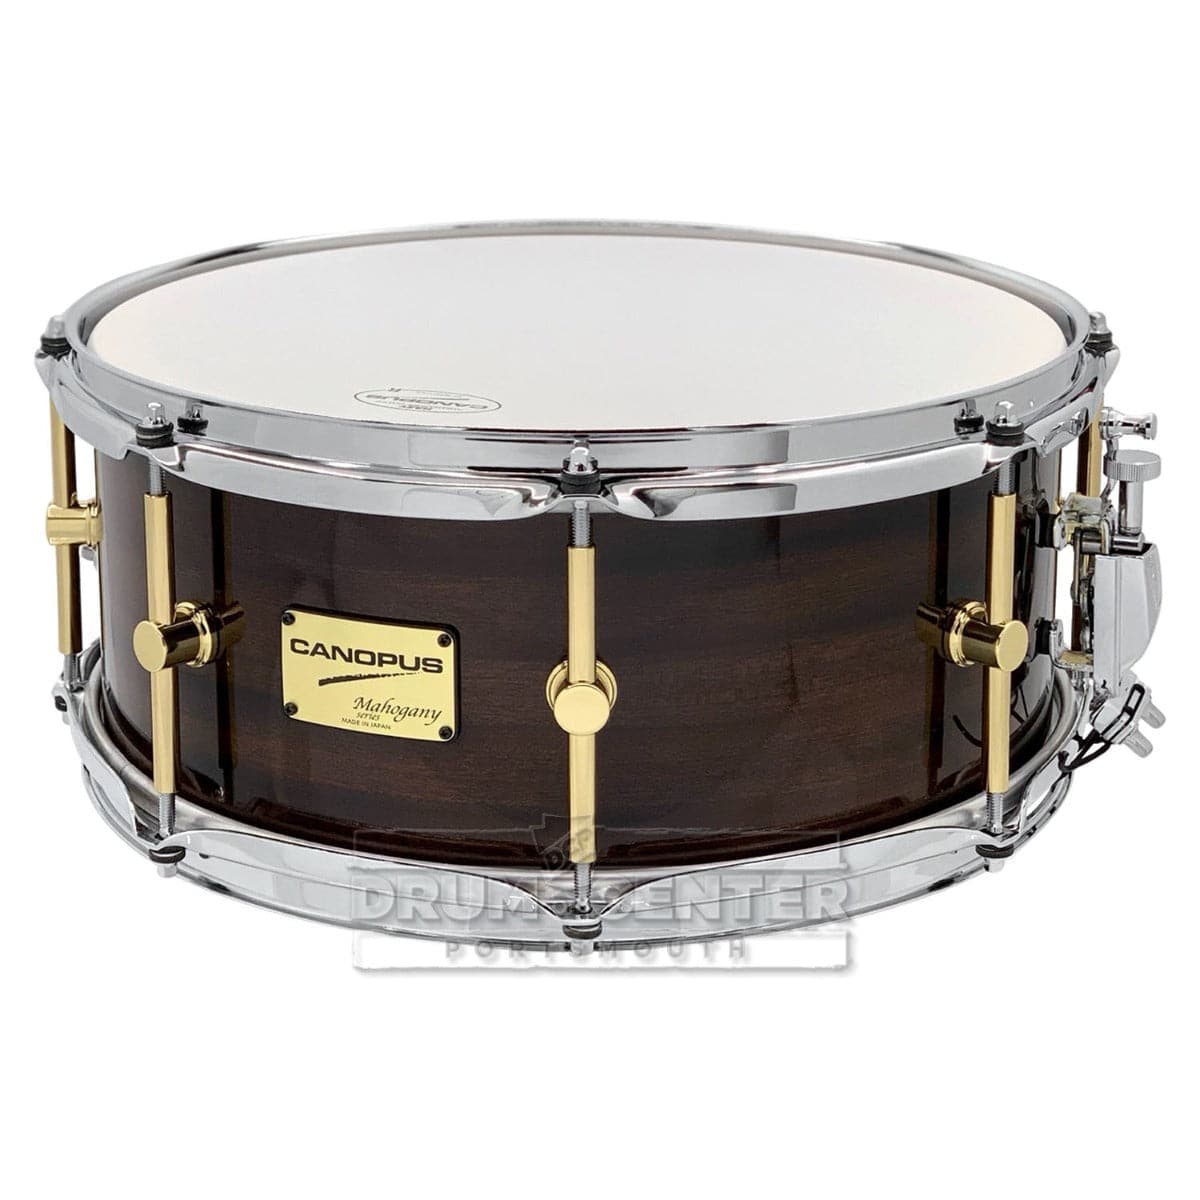 Canopus Mahogany Snare Drum 14x6 See Through Black Lacquer